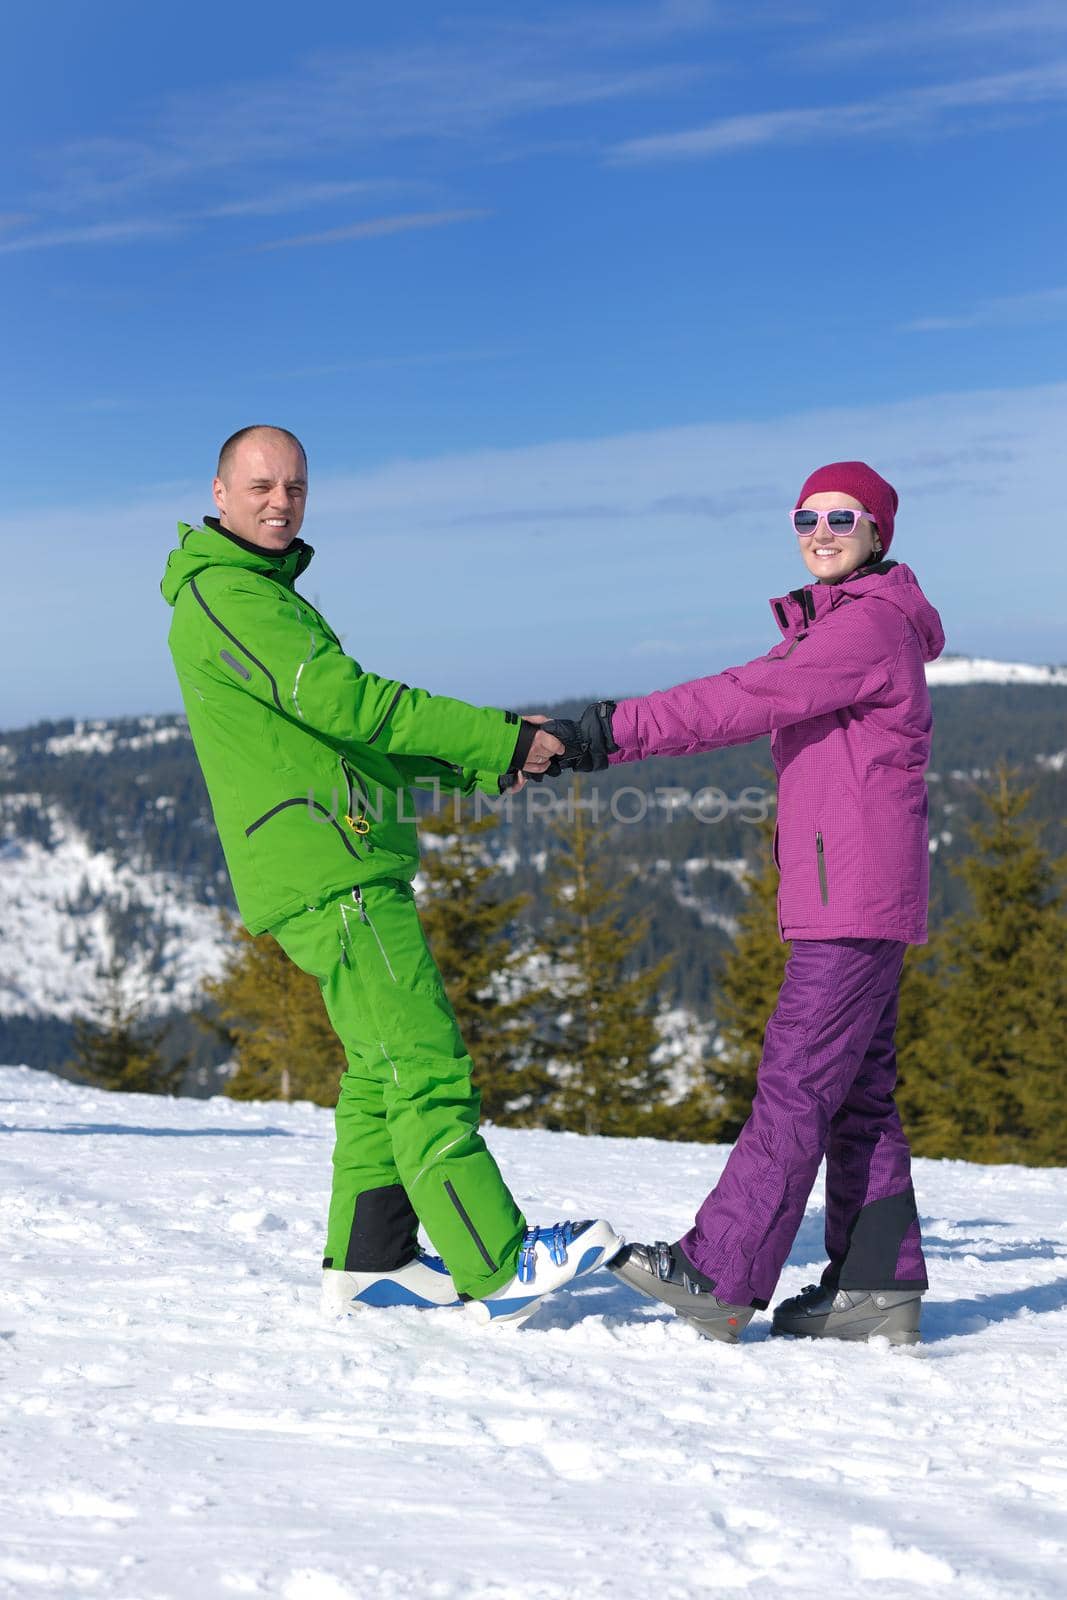 Portrait of happy couple at beautiful mountain on winter sunny day with blue sky and snow in background